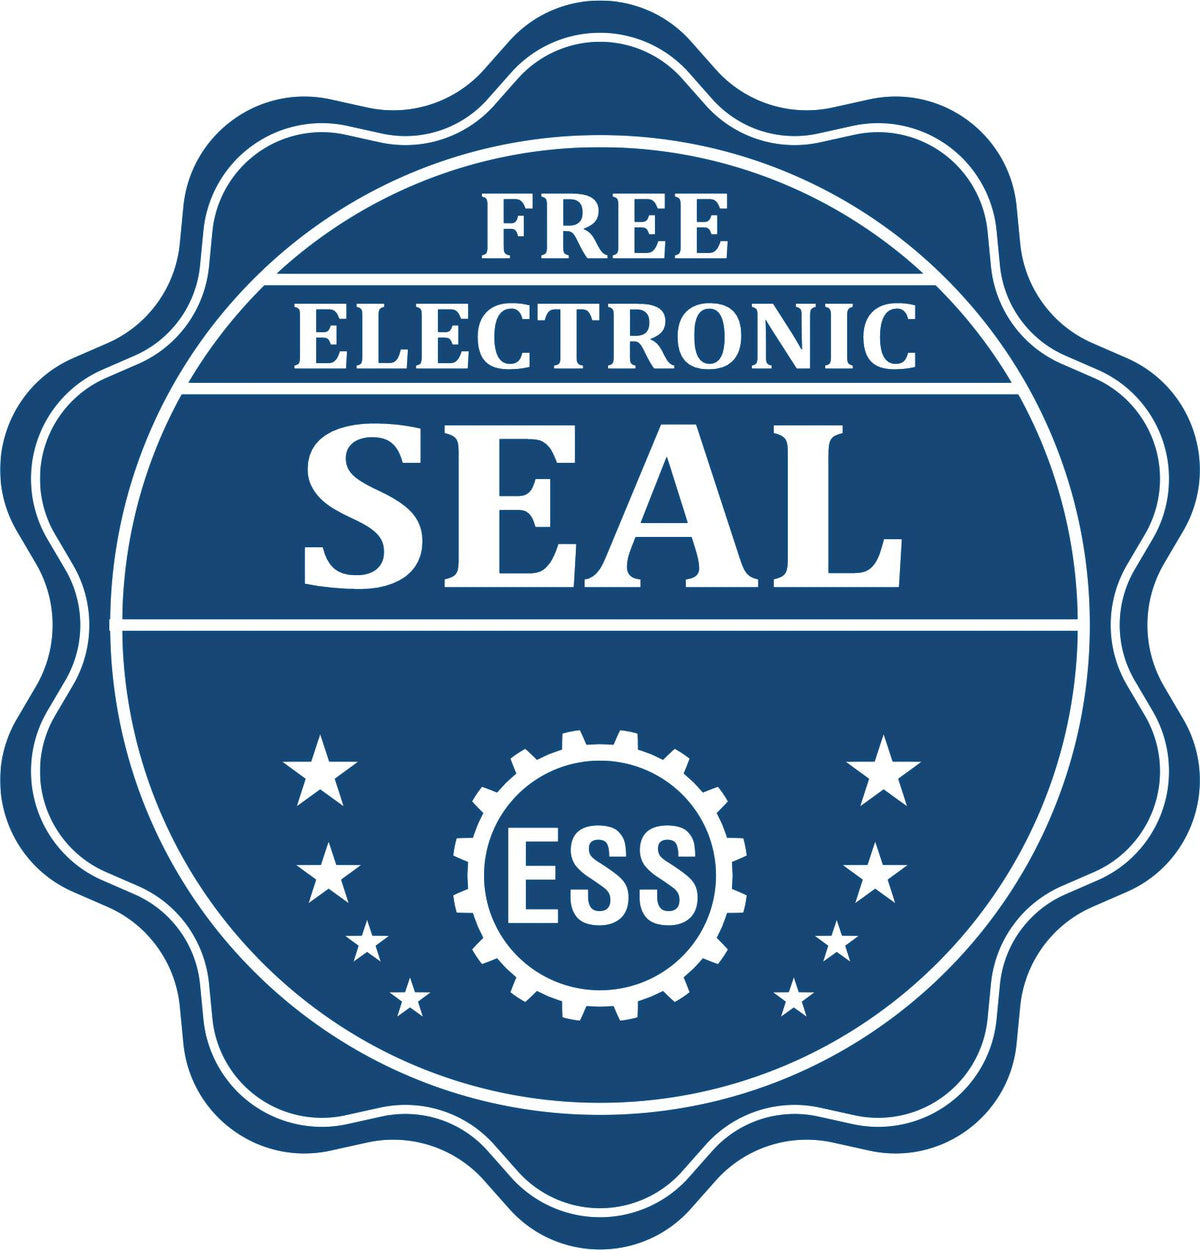 A badge showing a free electronic seal for the Long Reach Guam Land Surveyor Seal with stars and the ESS gear on the emblem.